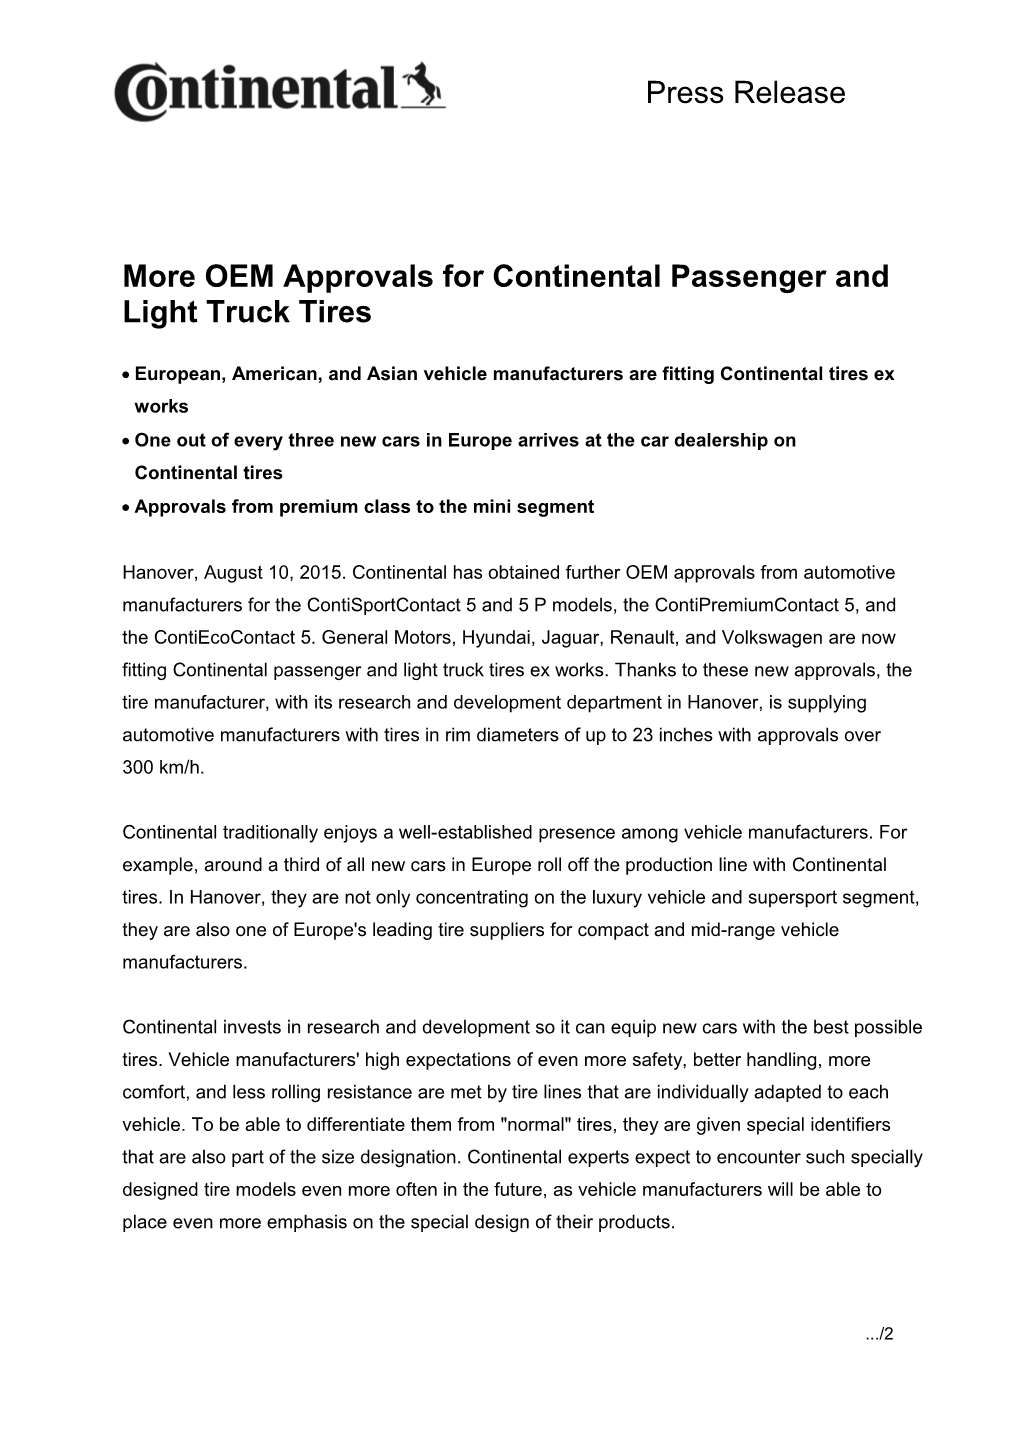 More OEM Approvals for Continental Passenger and Light Truck Tires s1